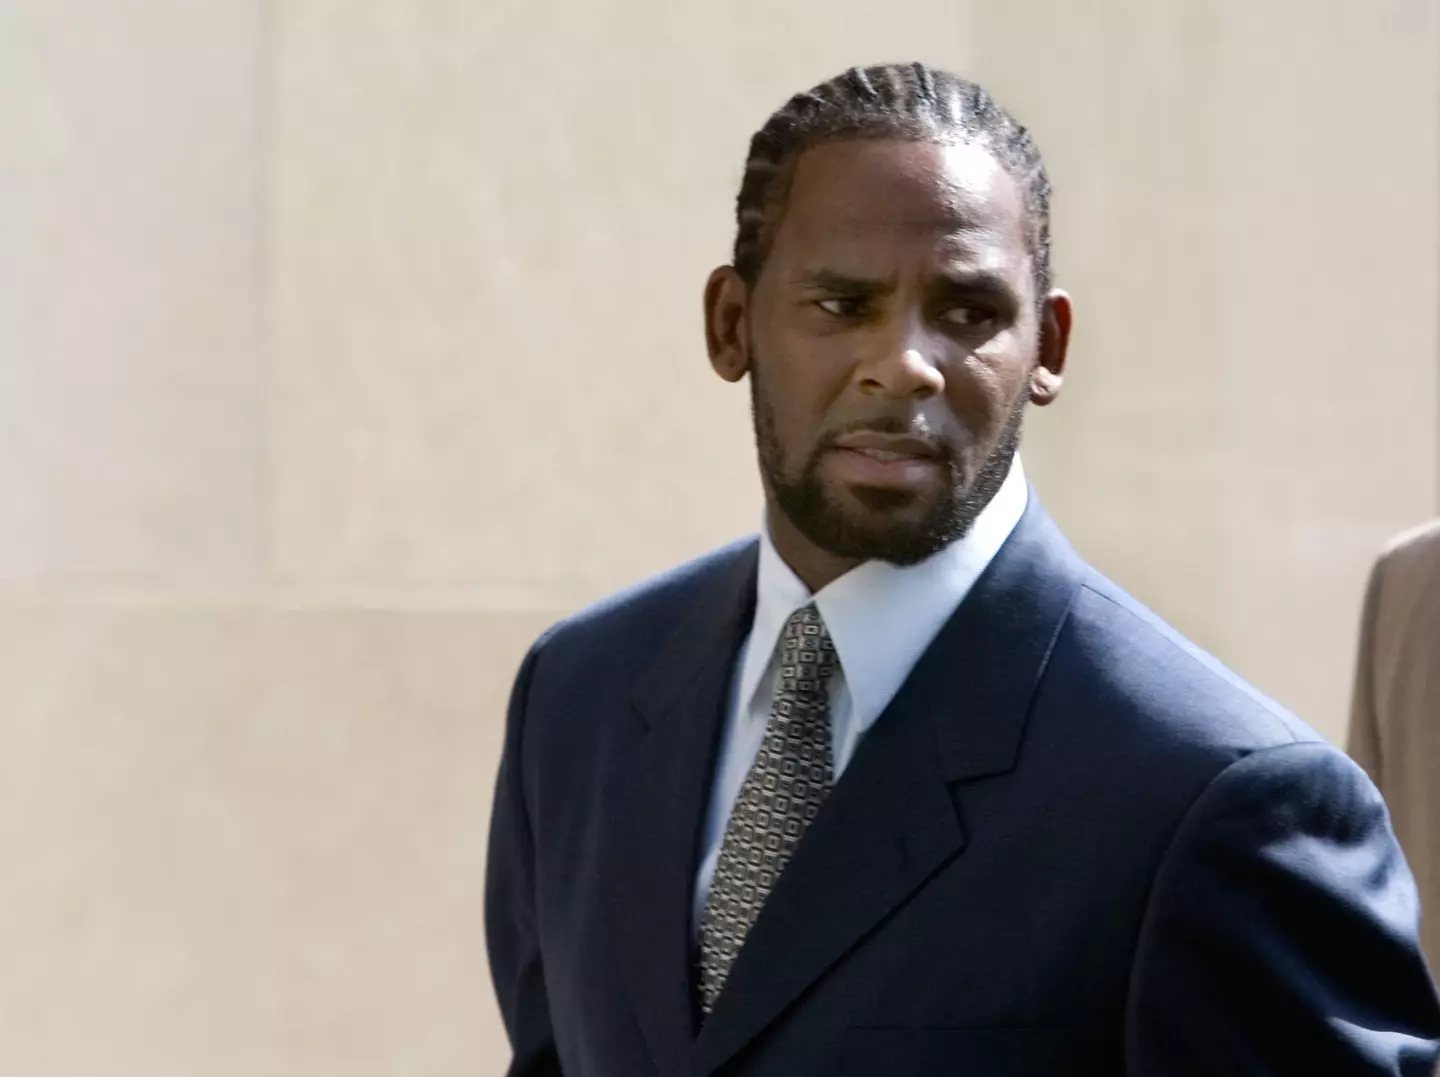 R. Kelly appeared to drop an album from prison today.